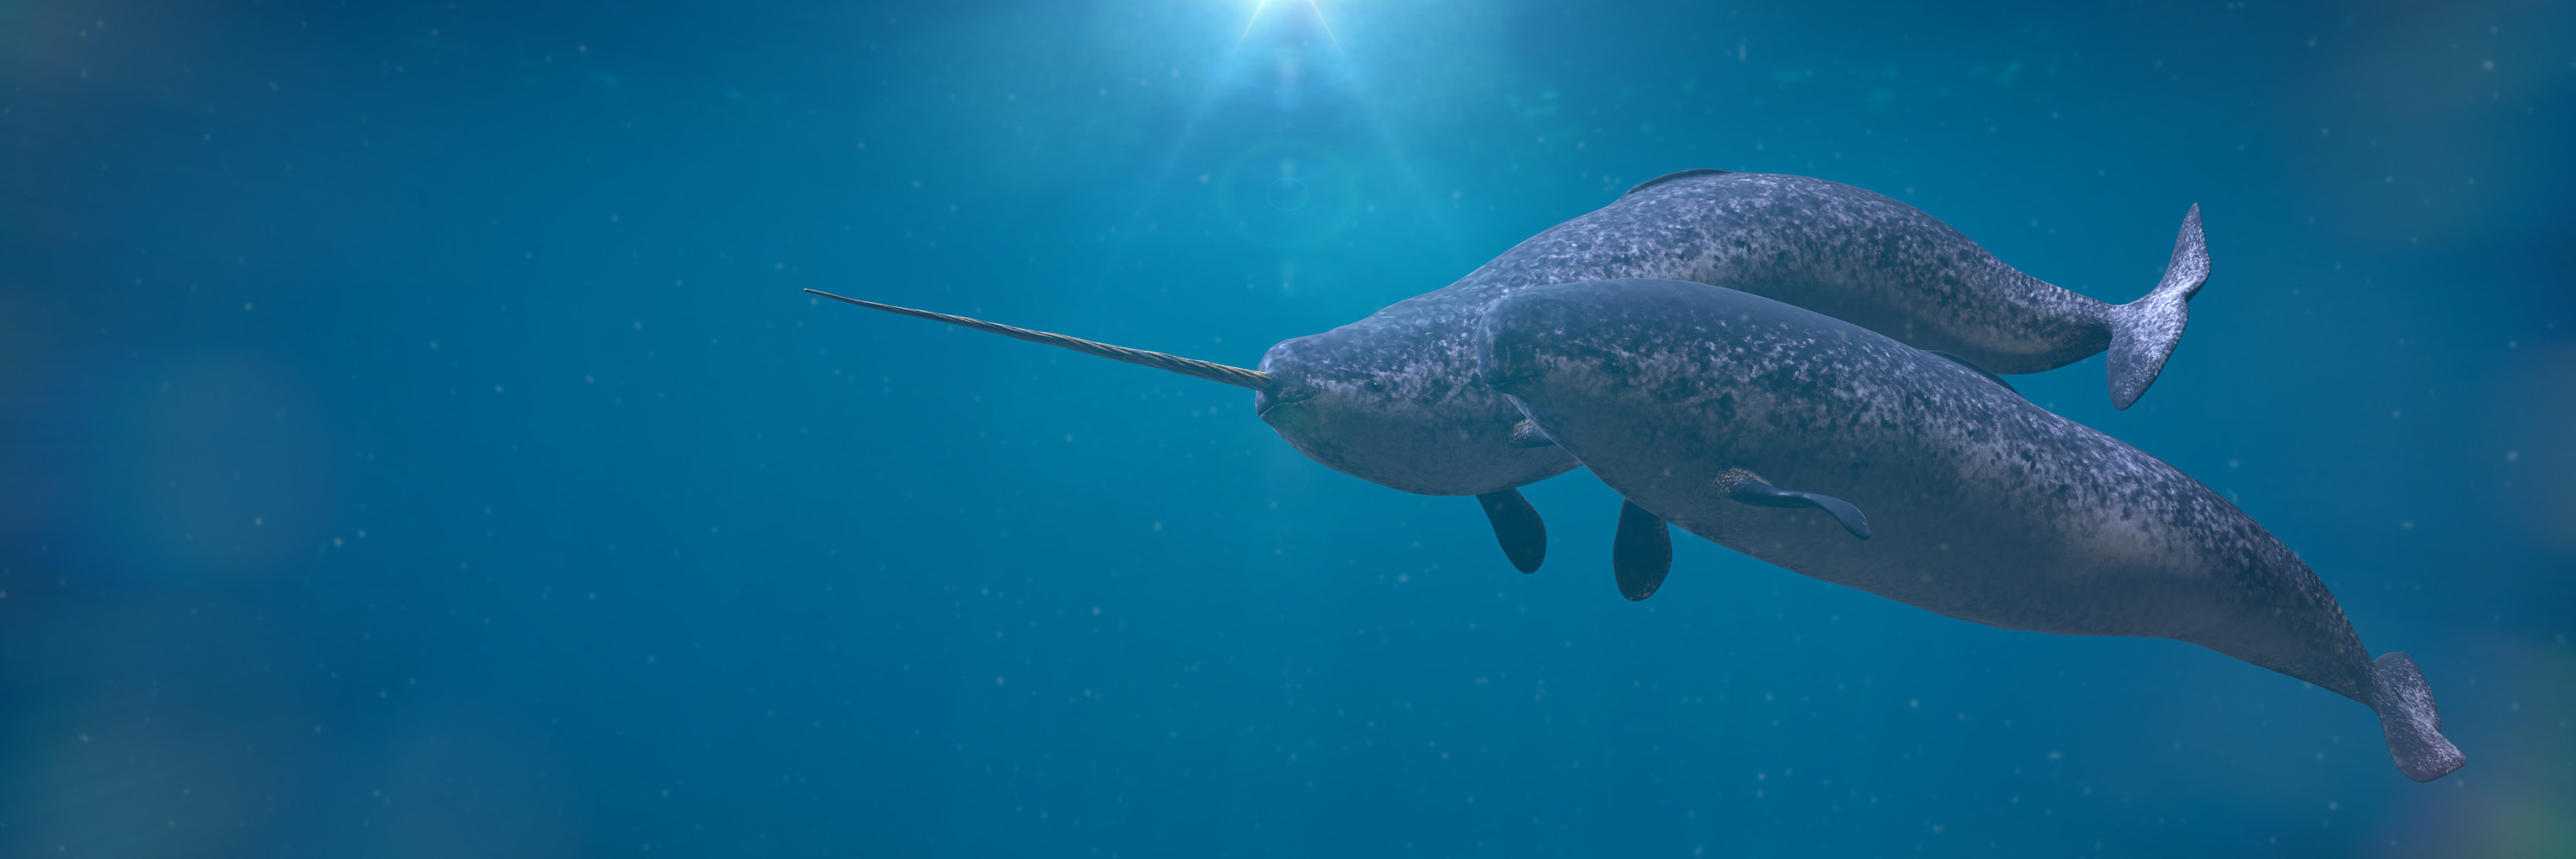 narwhals in the ocean